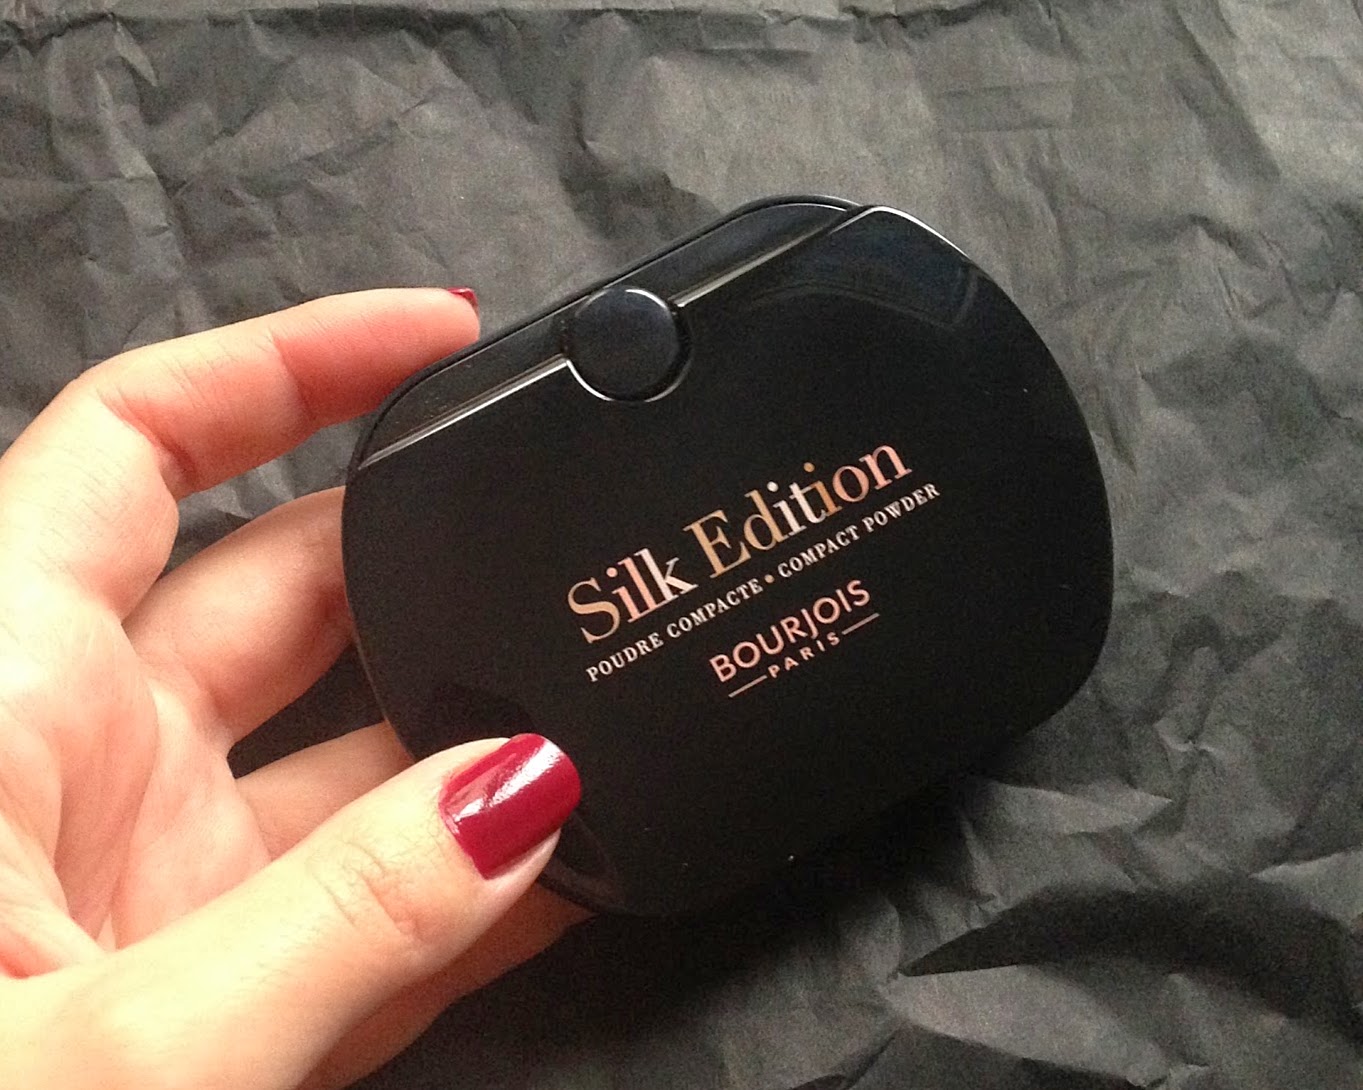 Finding the new everyday foundation-Bourjois Silk edition compact ...